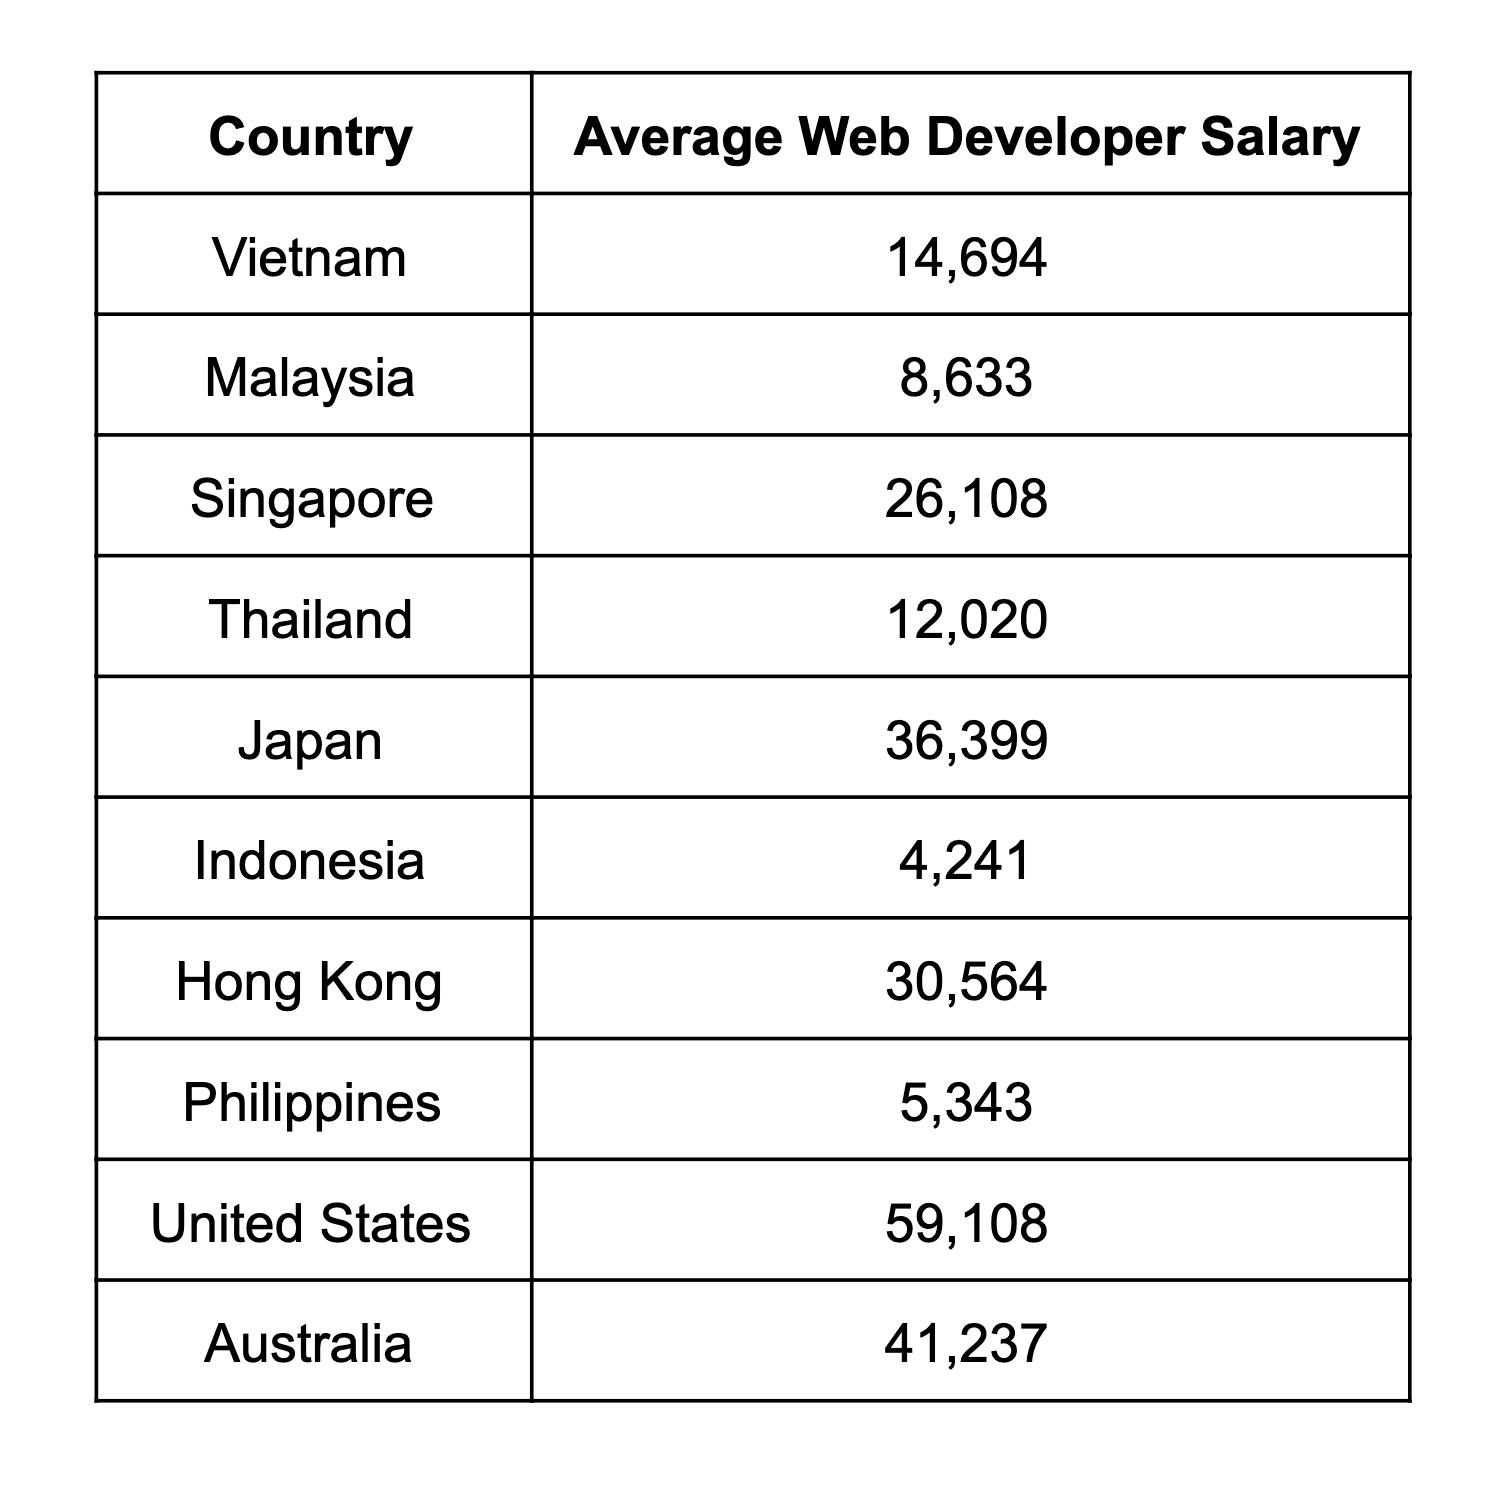 Average Developer Salary between Asia Countries and Western Countries